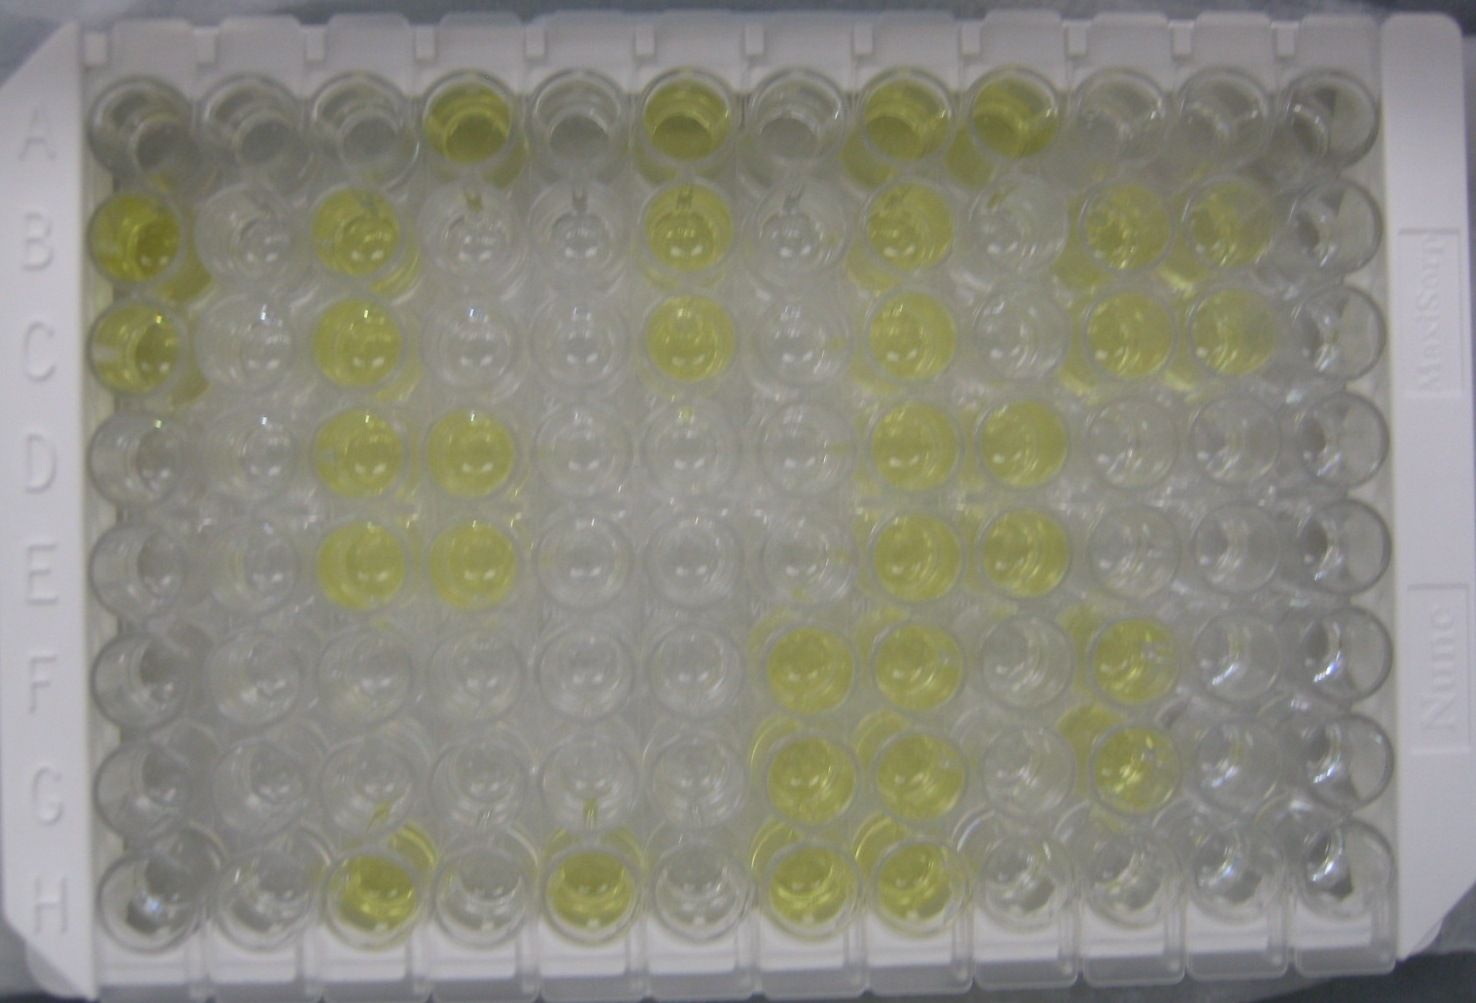 ELISA microplate showing colorimetric reaction of virus-infected samples. 